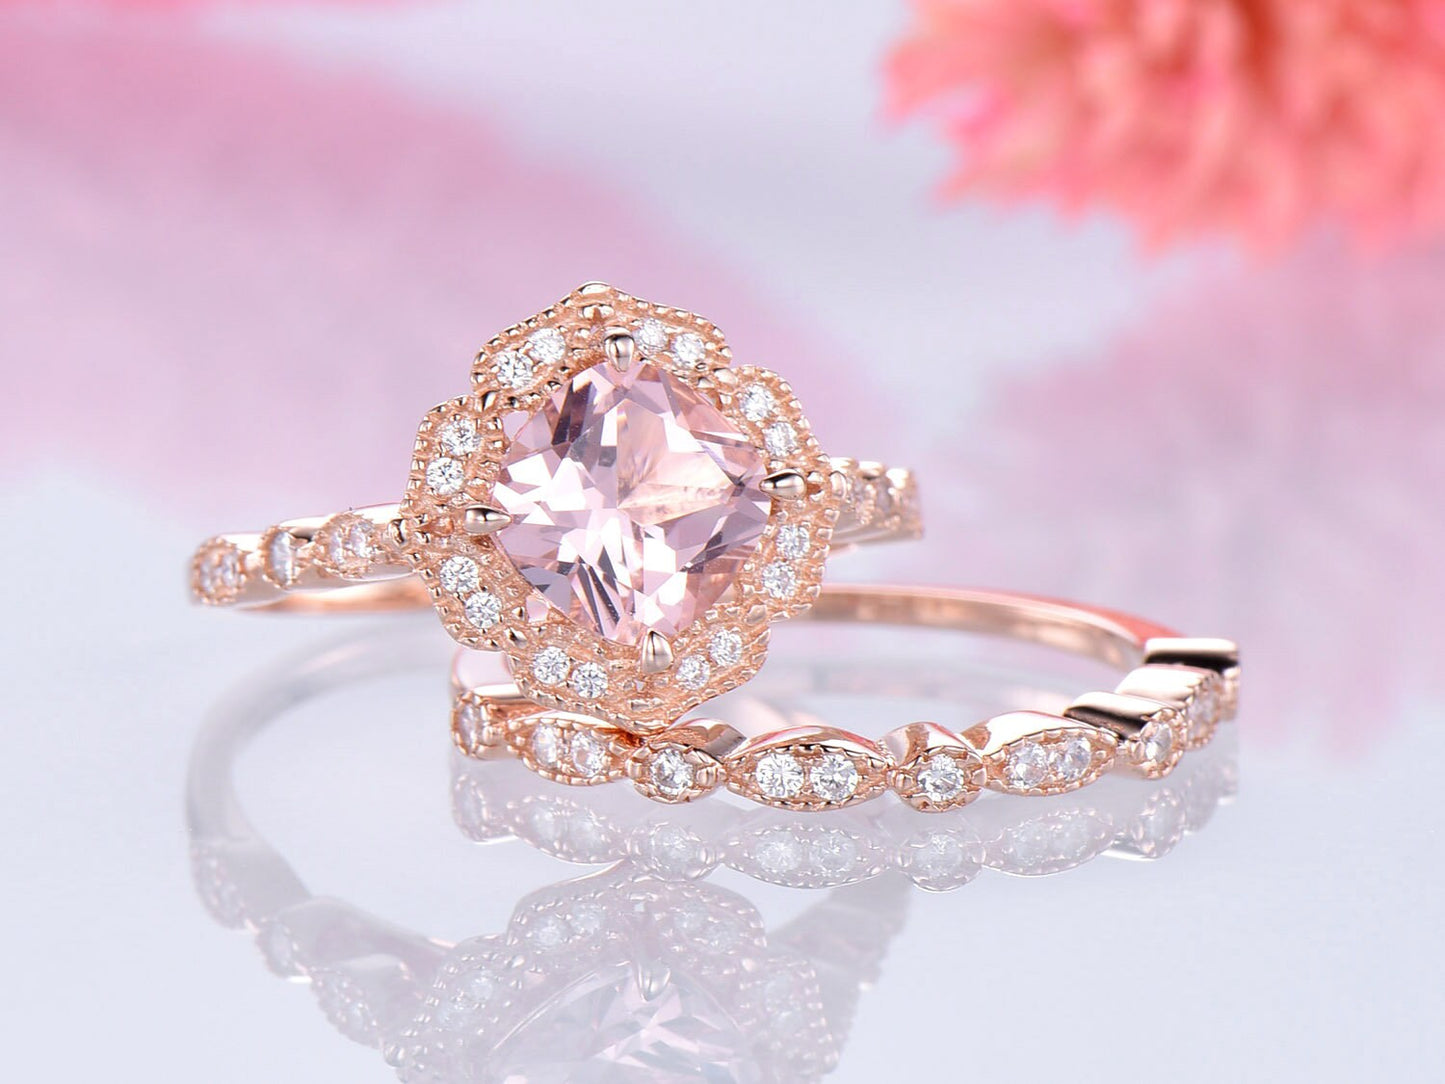 Pink morganite engagement ring art deco CZ wedding band rose gold plated bridal promise ring set 7mm cushion cut morganite wedding ring set